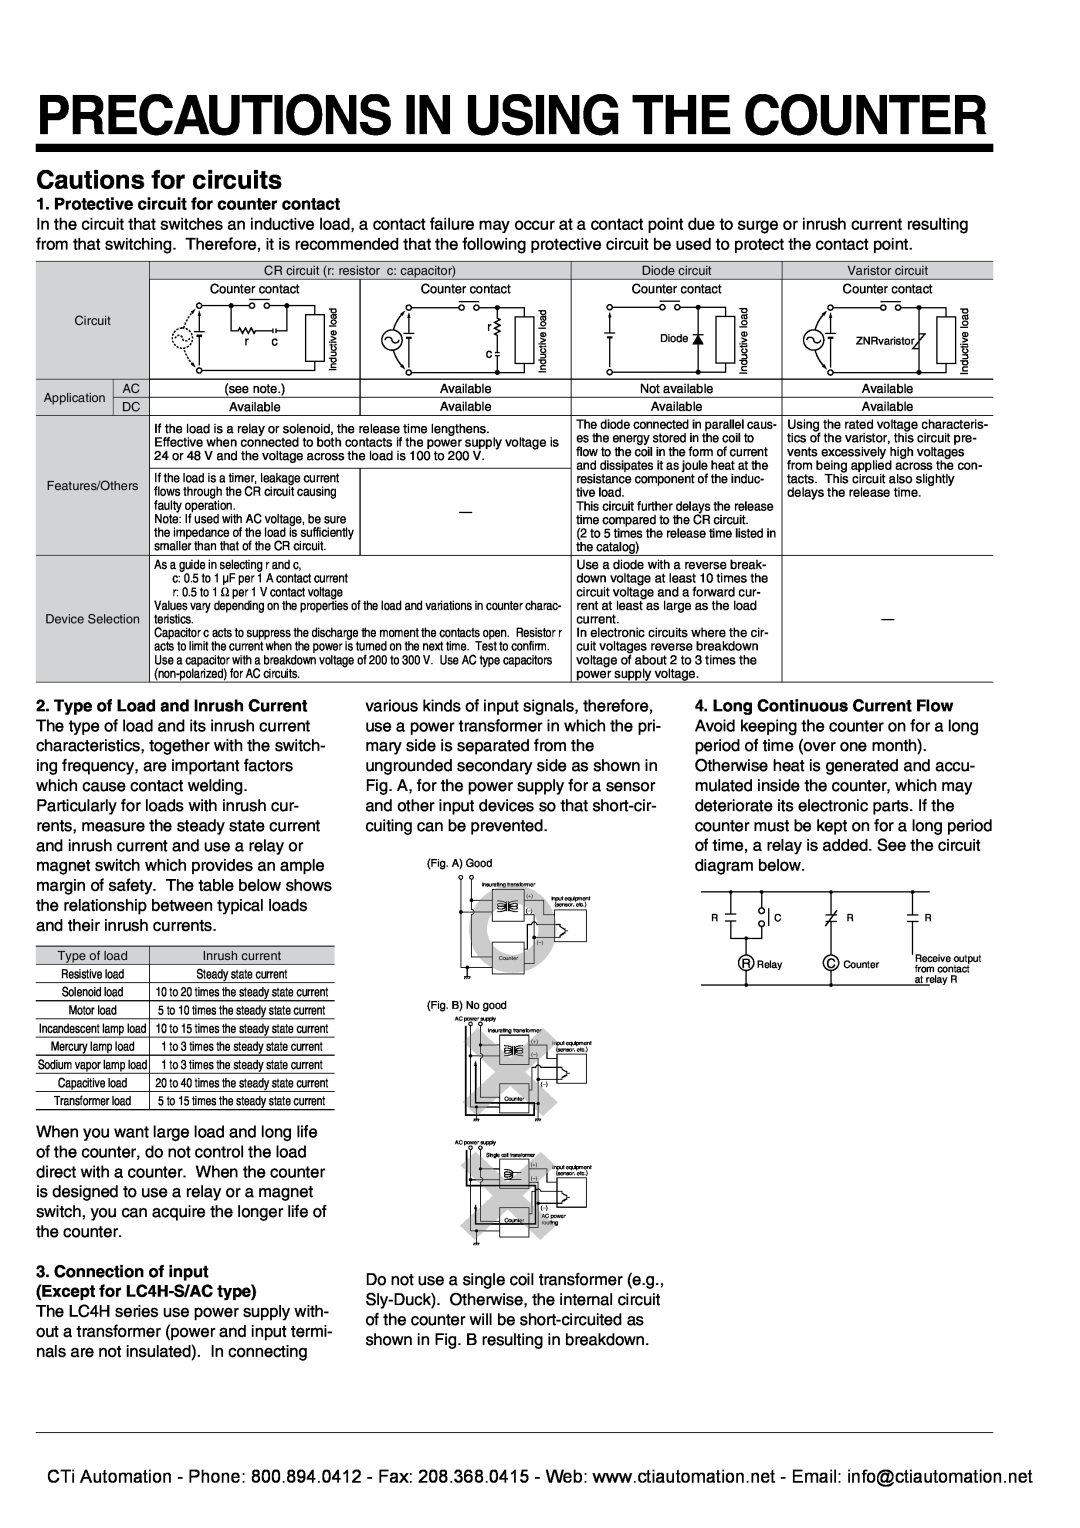 Panasonic LC2H Cautions for circuits, Precautions In Using The Counter, Protective circuit for counter contact 